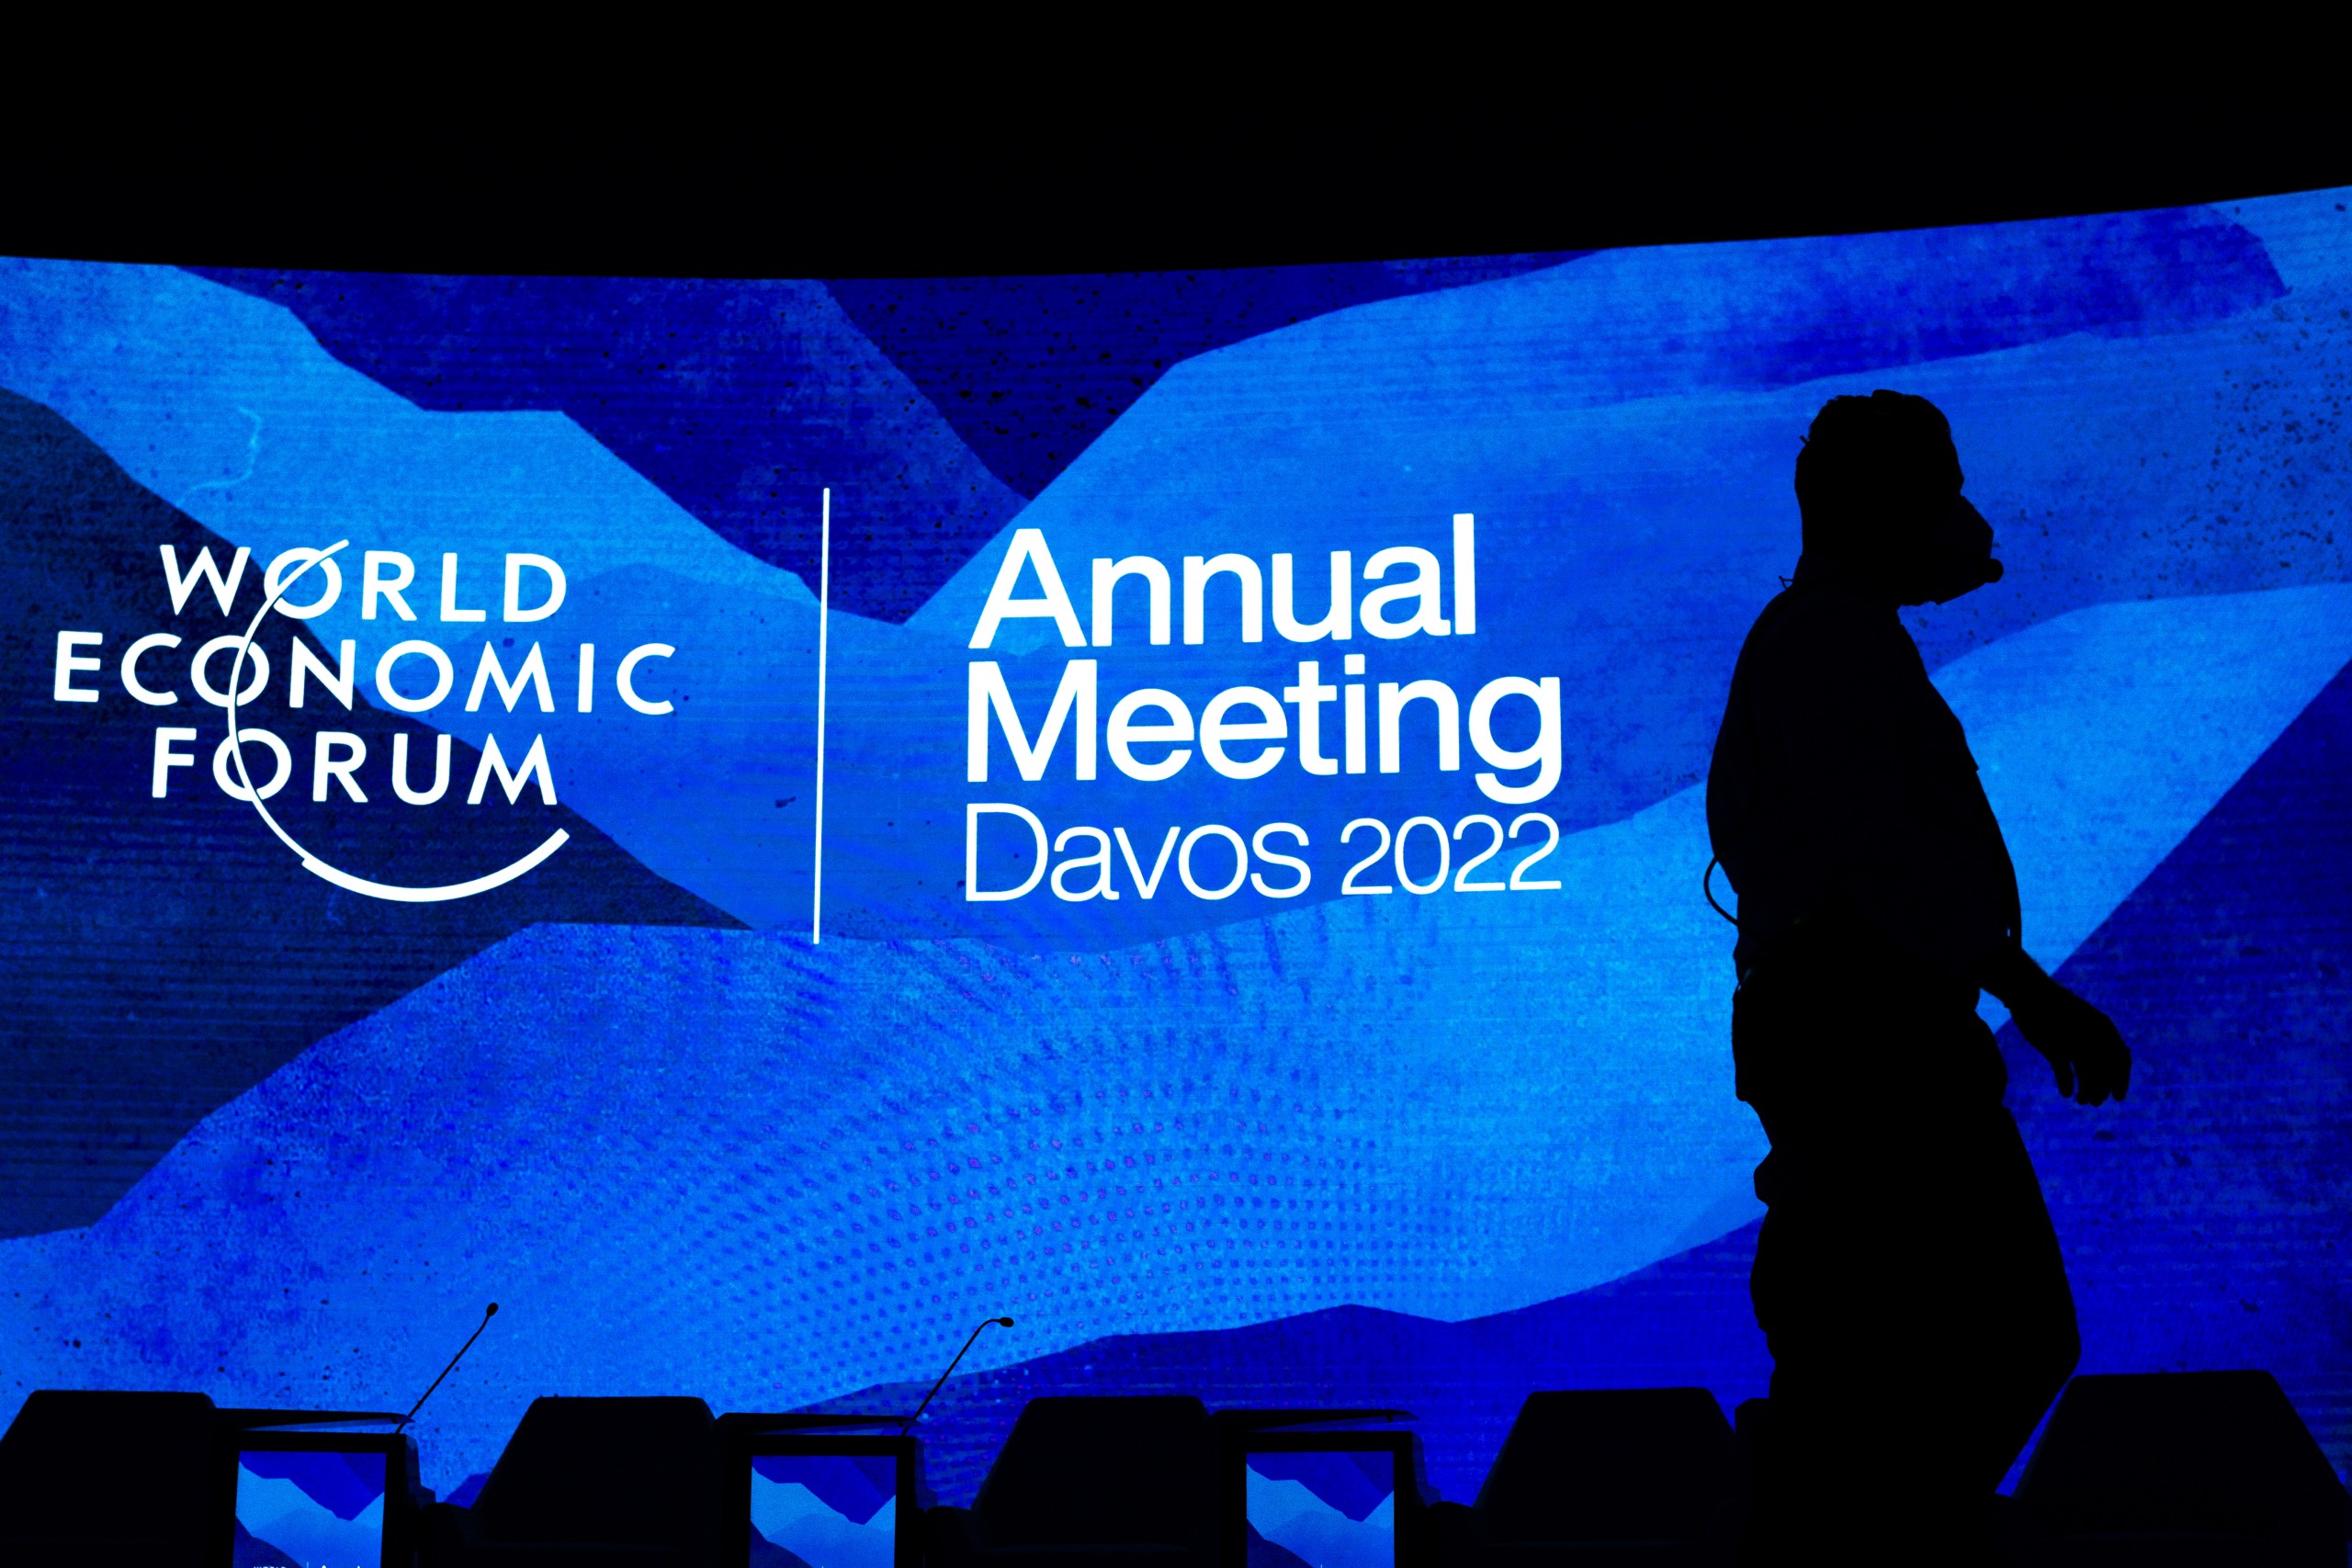 epa09965135 Workers set the stage prior the annual meeting of the World Economic Forum (WEF) in Davos, Switzerland, 22 May 2022. The forum begins 22 May, after being postponed due to the COVID-19 outbreak and rescheduled to early summer.  EPA/GIAN EHRENZELLER